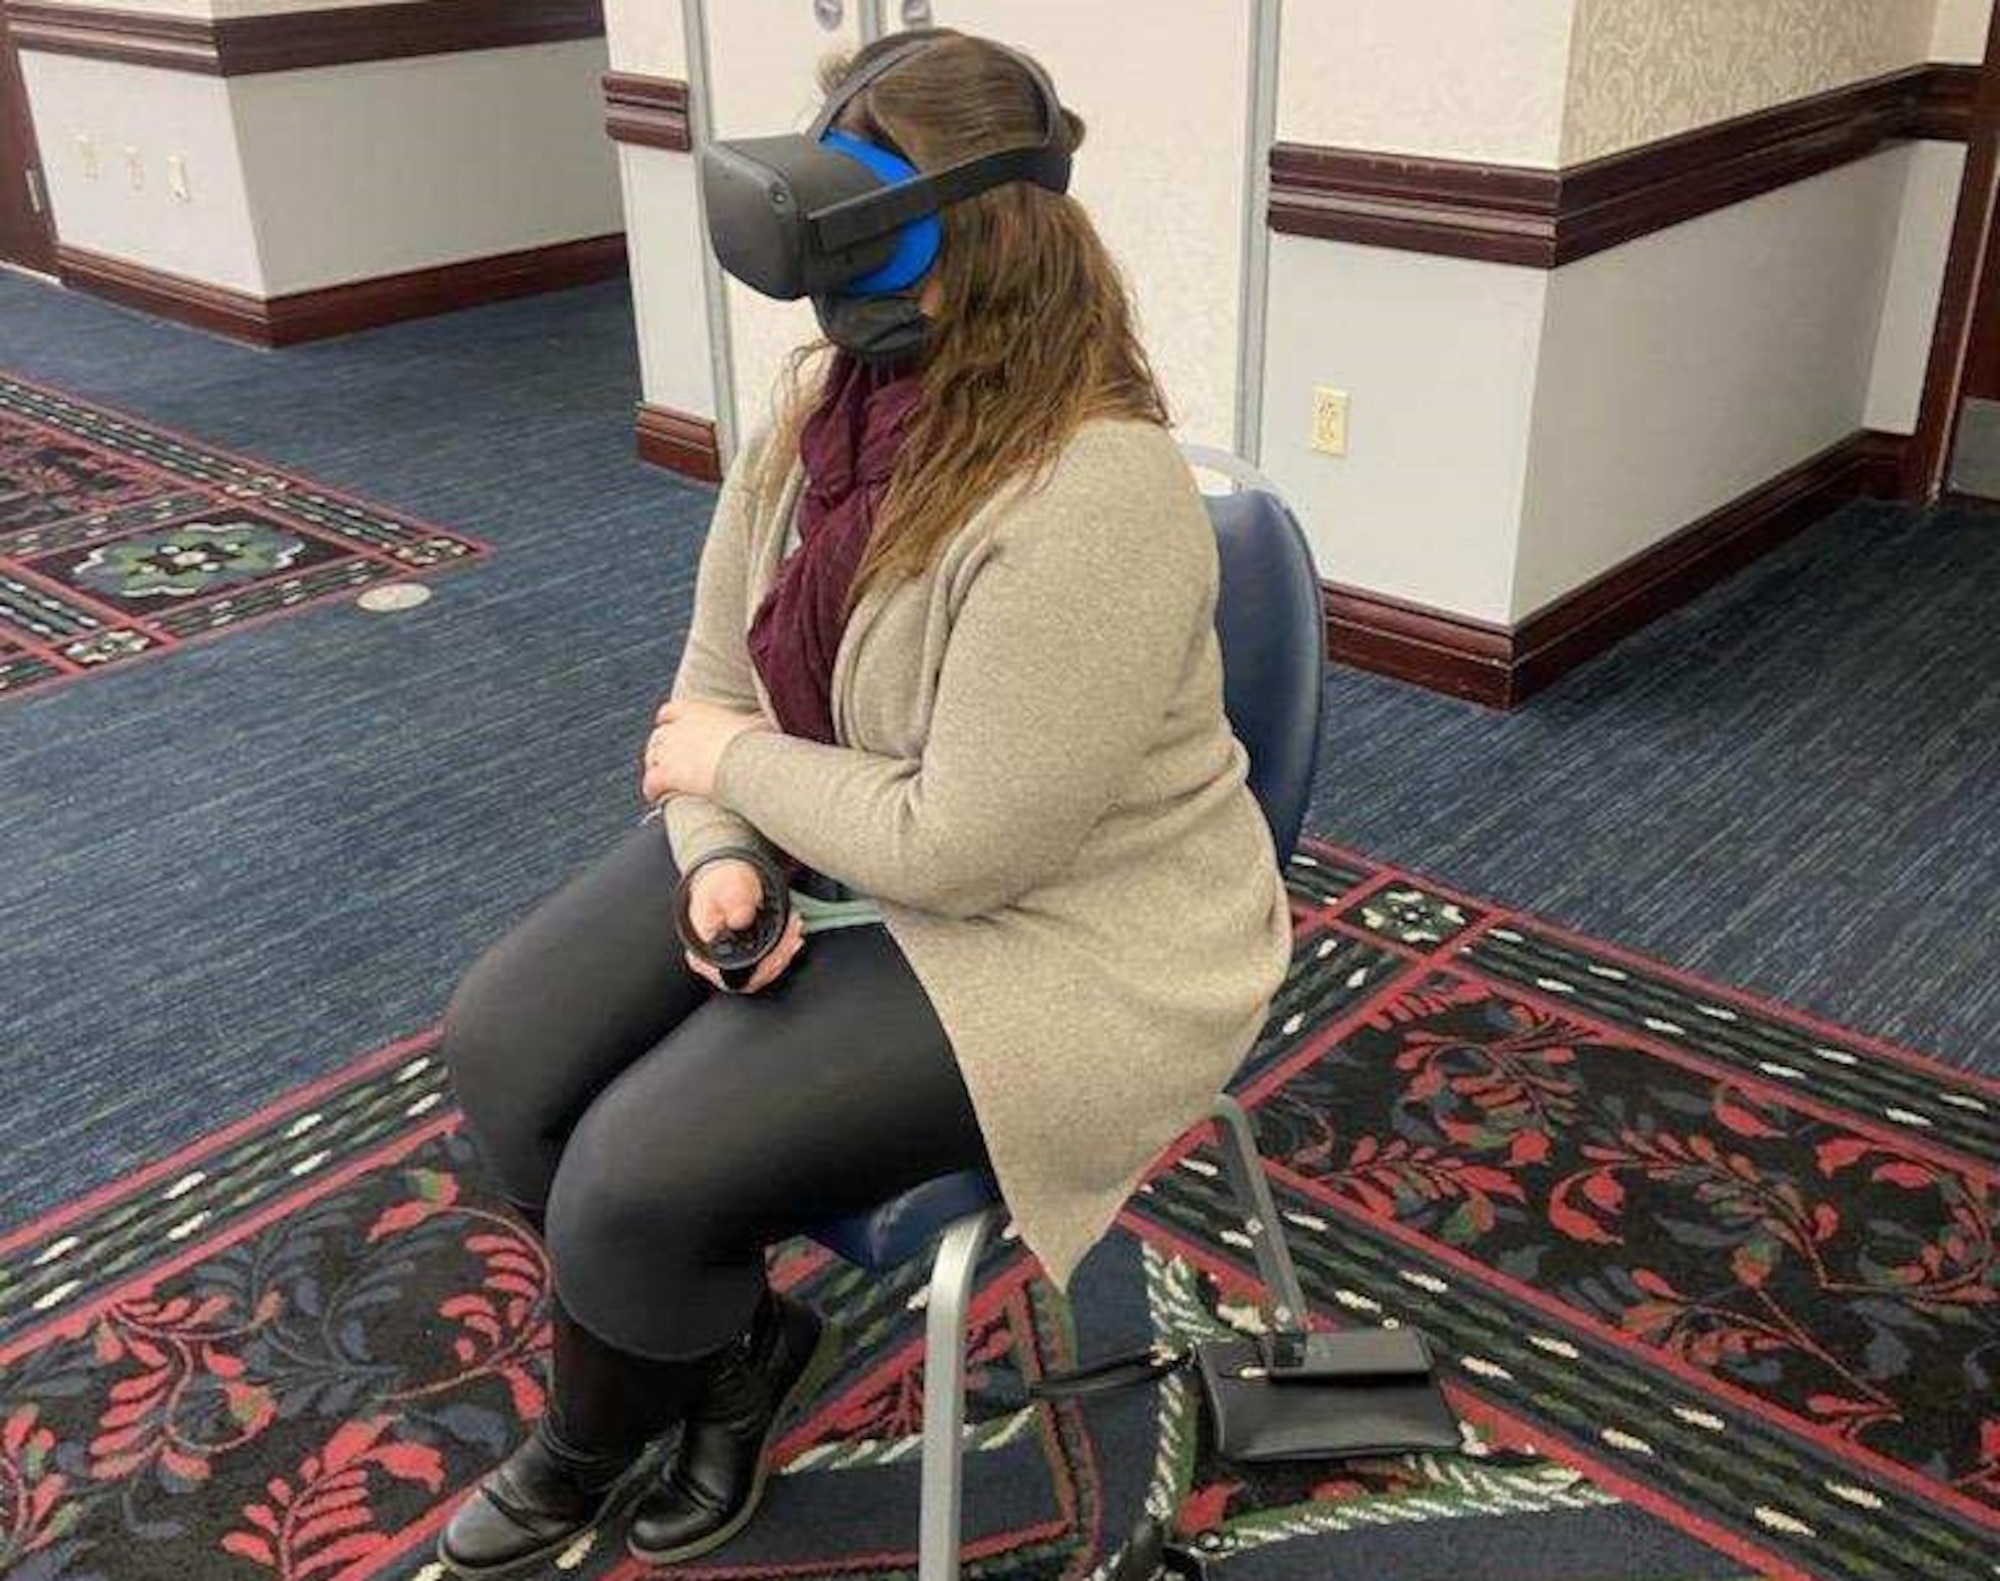 Contract specialist experiences virtual reality suicide prevention training with VR goggles and a controller.